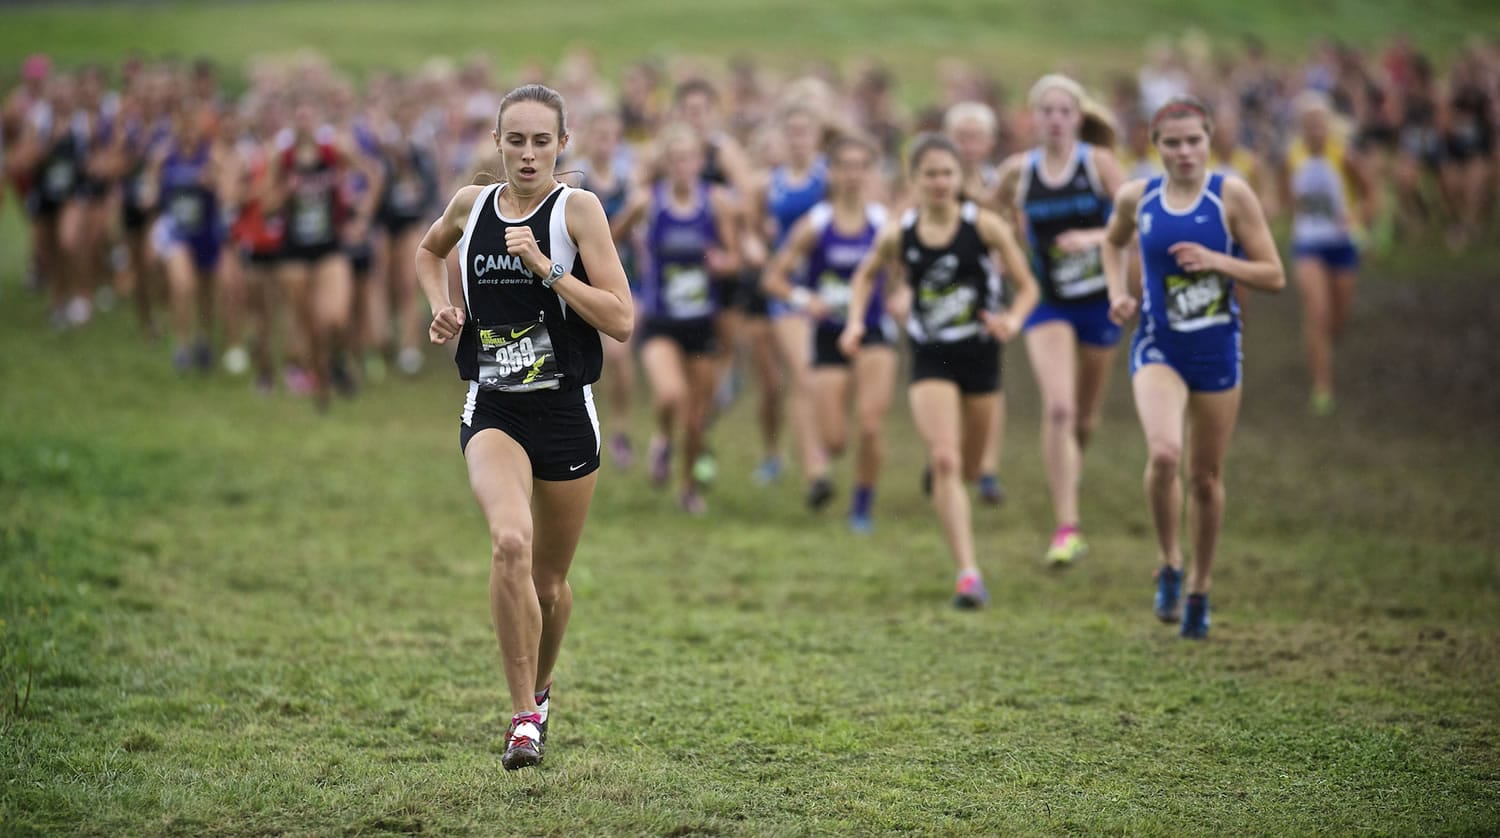 Camas' Alexa Efraimson gets an early lead and never looks back at the Nike Pre-Nationals cross country meet at Portland Meadows on Saturday.